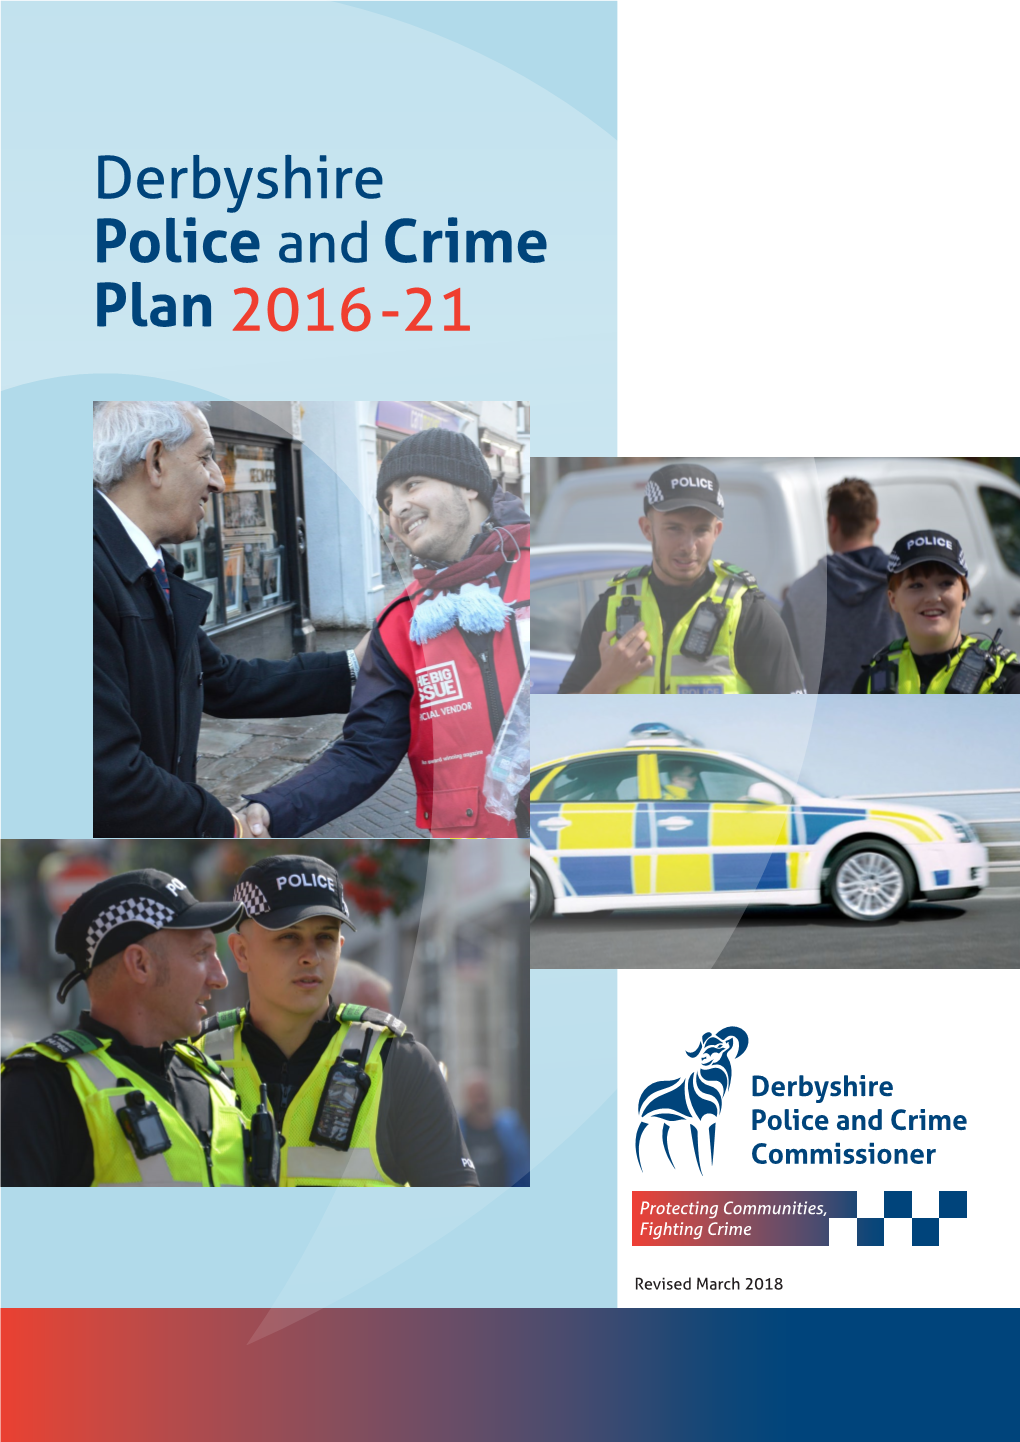 Derbyshire Police and Crime Plan 2016-21